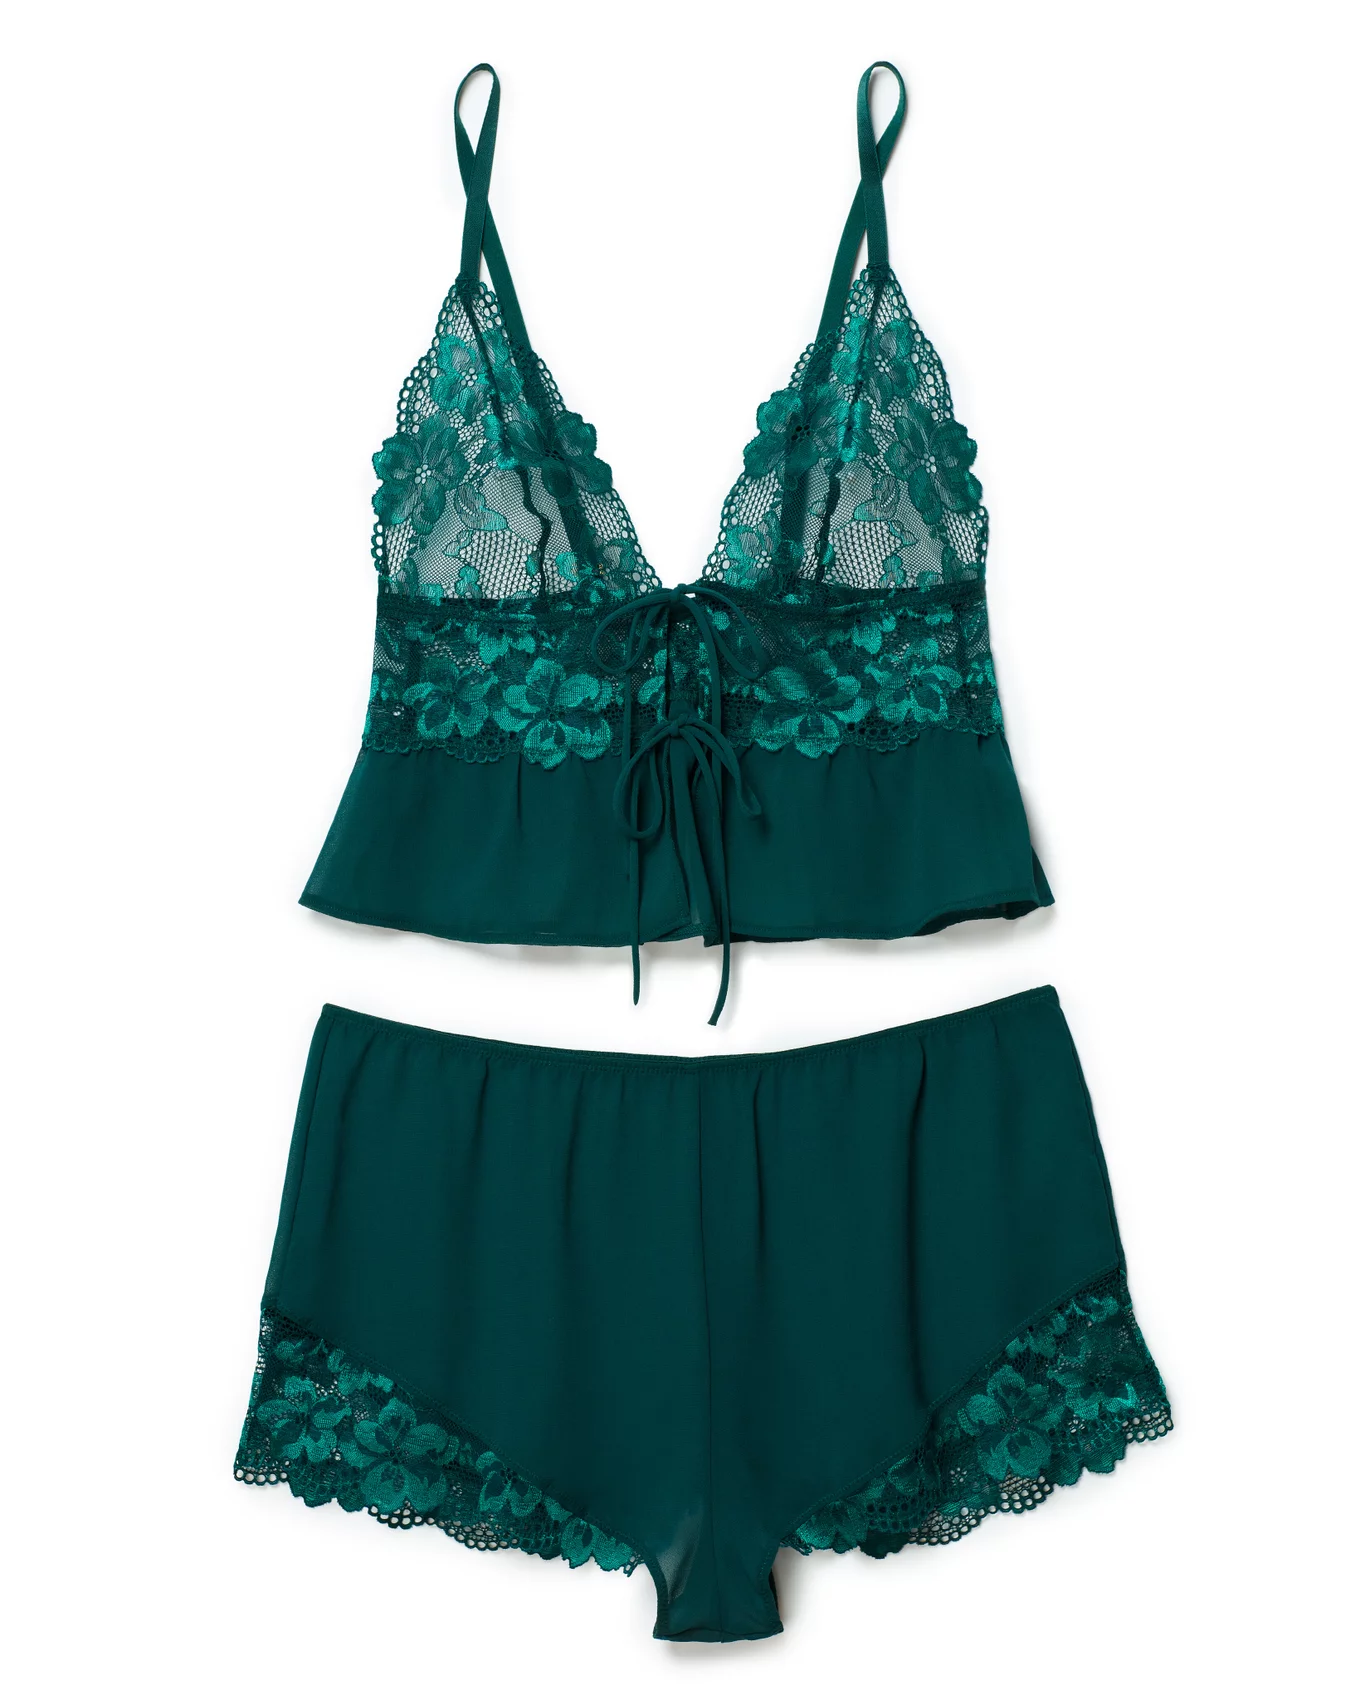 2 piece sheer lingerie set including cropped ruffled camisole and high  waisted tap pants